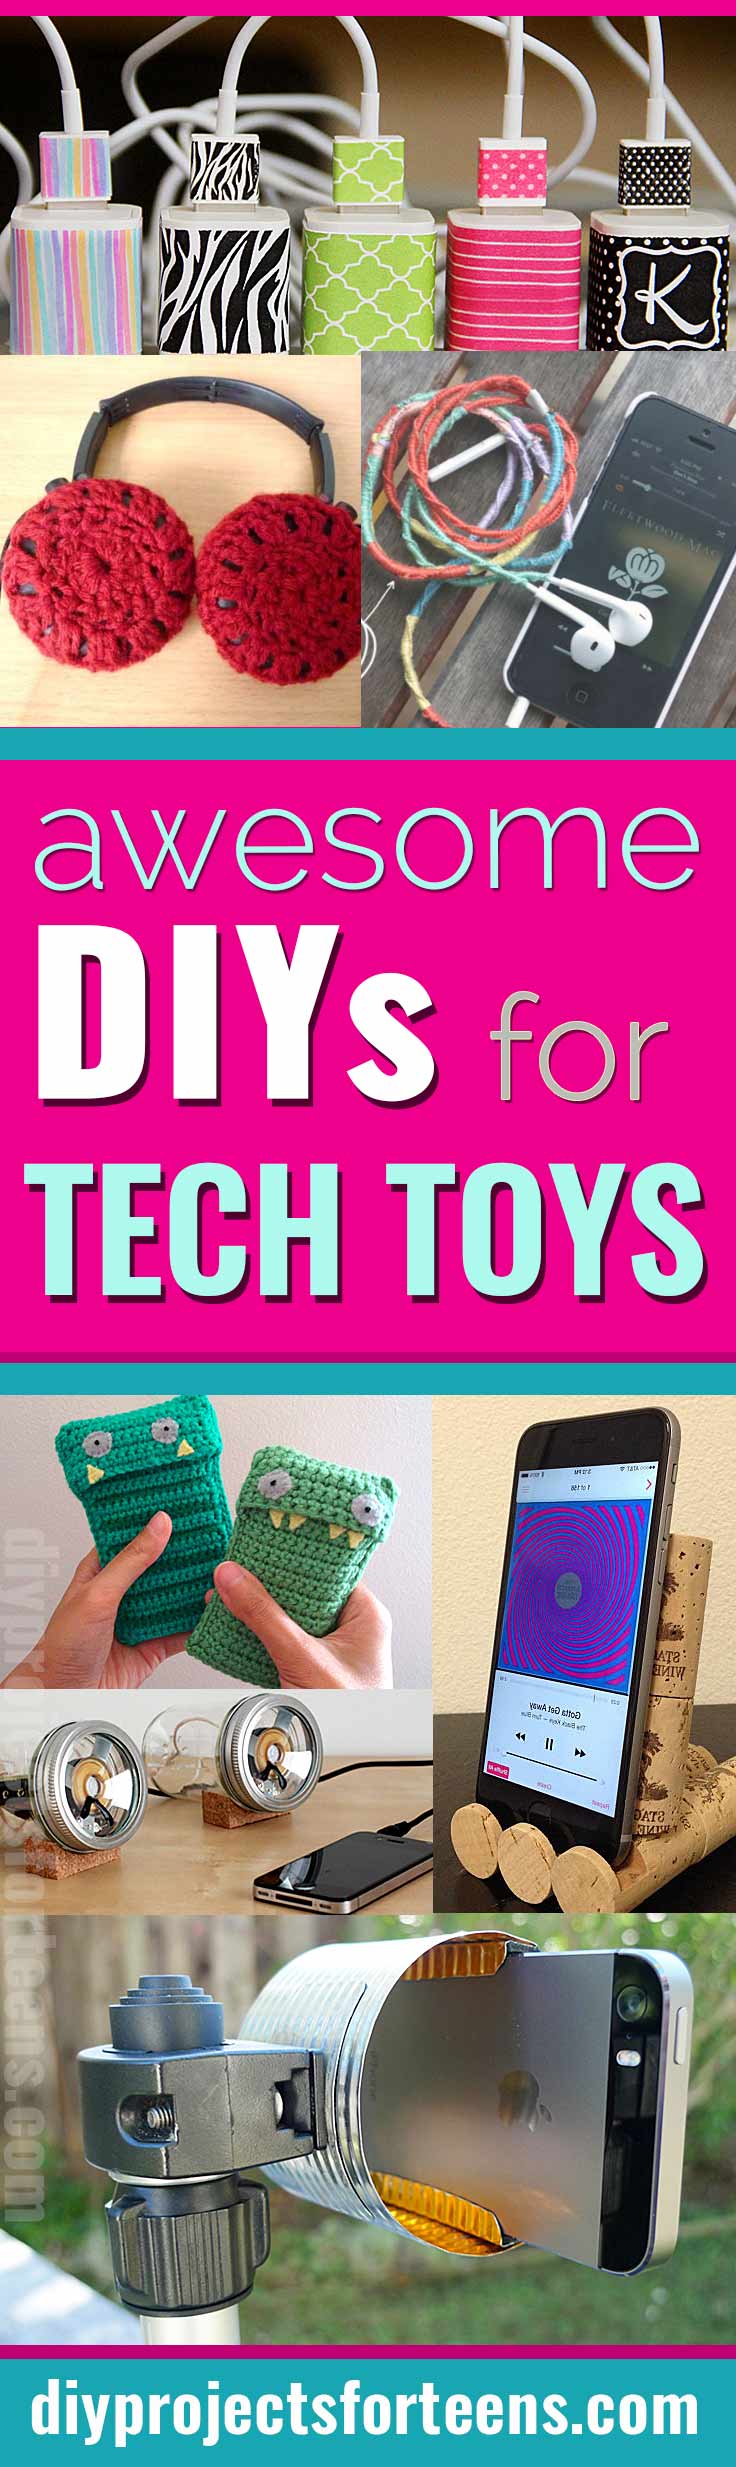 35 Awesome DIYs for your Tech Toys